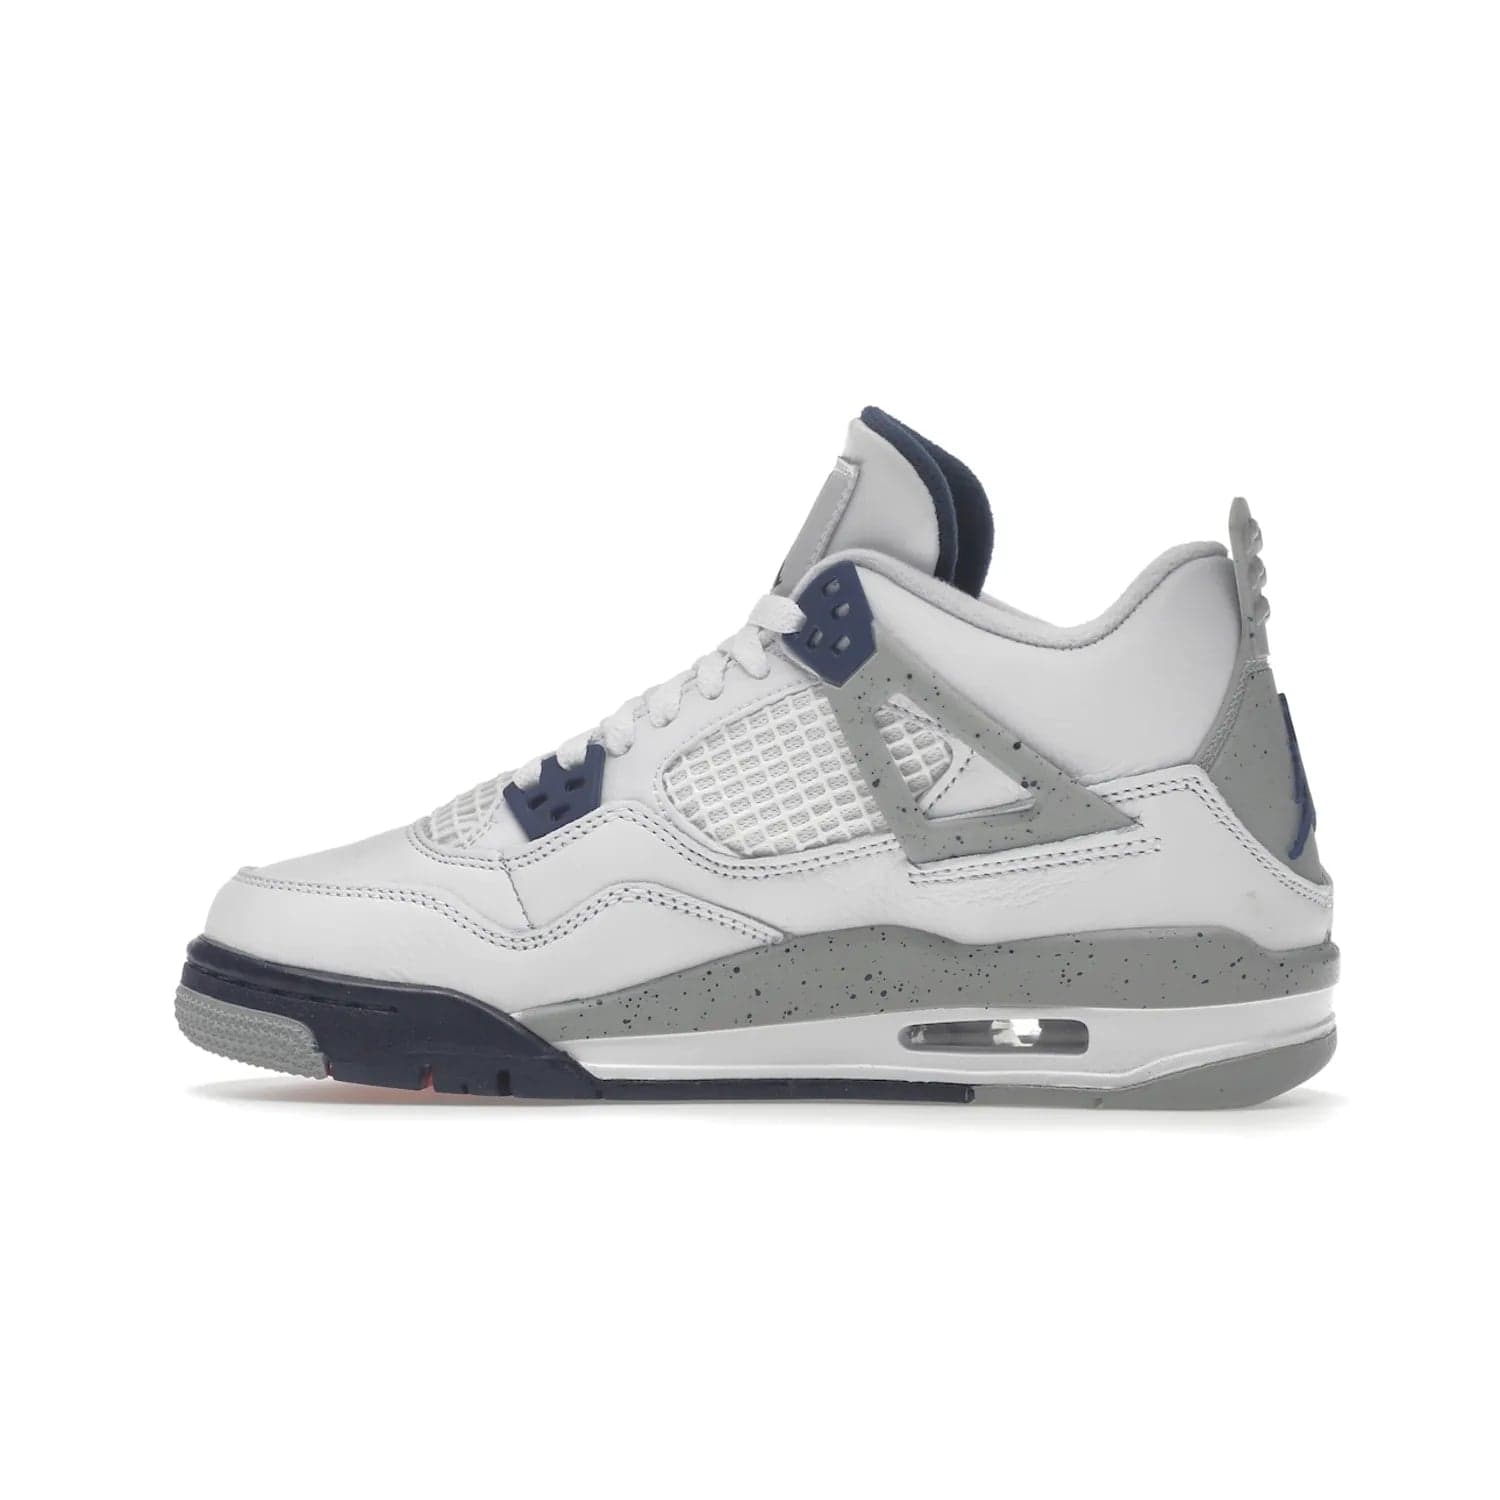 Jordan 4 Retro Midnight Navy (GS) - Image 20 - Only at www.BallersClubKickz.com - Shop the Air Jordan 4 Retro Midnight Navy GS. The white leather upper features black support wings & heel tab, navy eyelets & woven tongue tag with Jumpman logos. The midsole features two-tone polyurethane insole & AIR units in the heel & forefoot. Get the white/midnight navy/light smoke grey/fire colorway & show off your style.